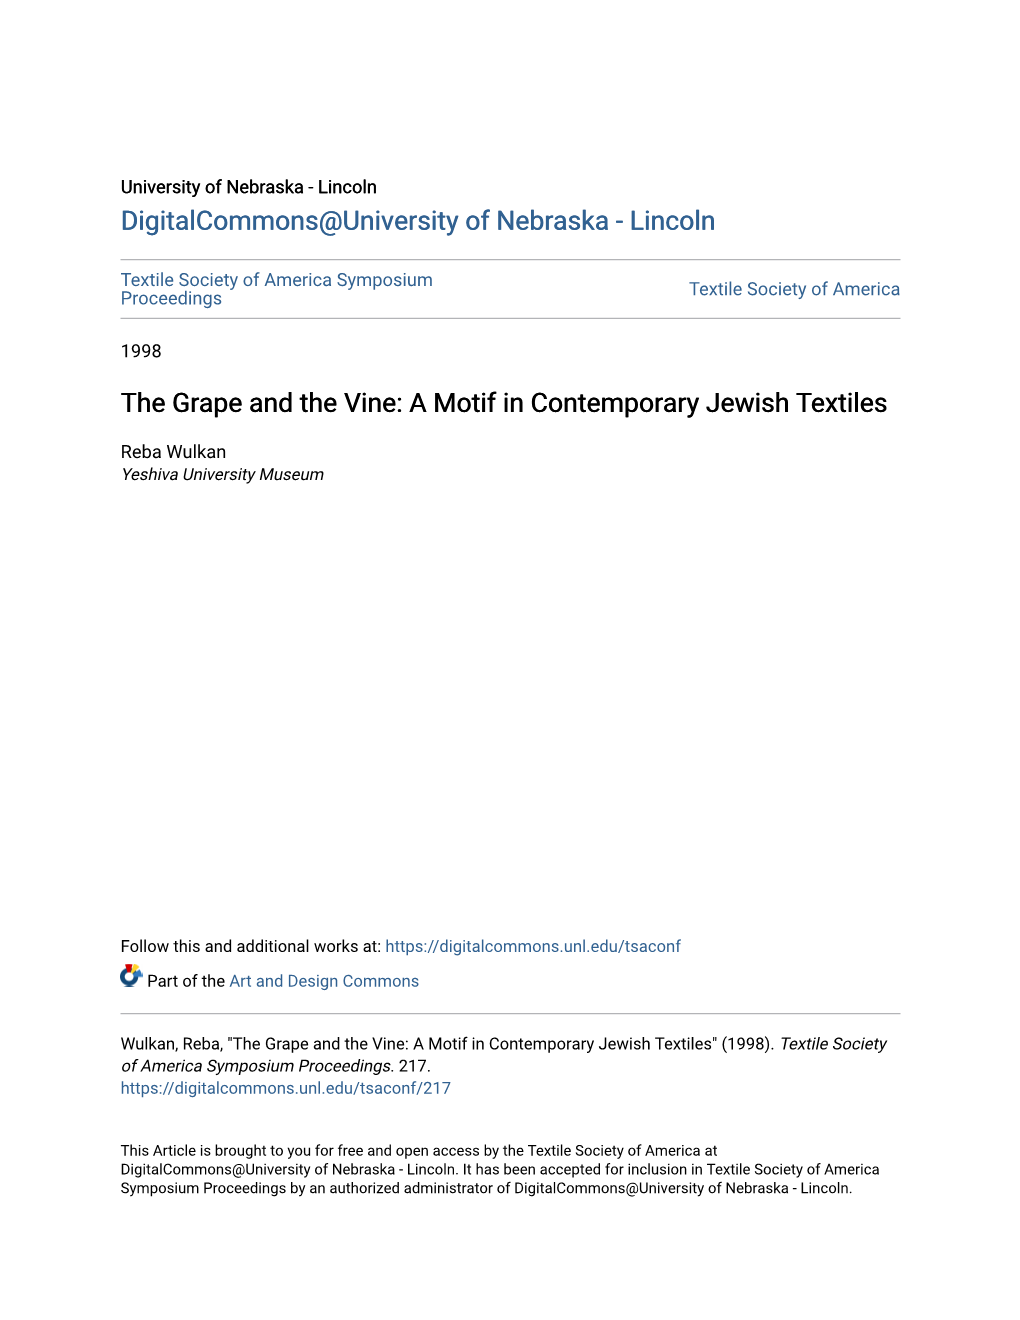 The Grape and the Vine: a Motif in Contemporary Jewish Textiles